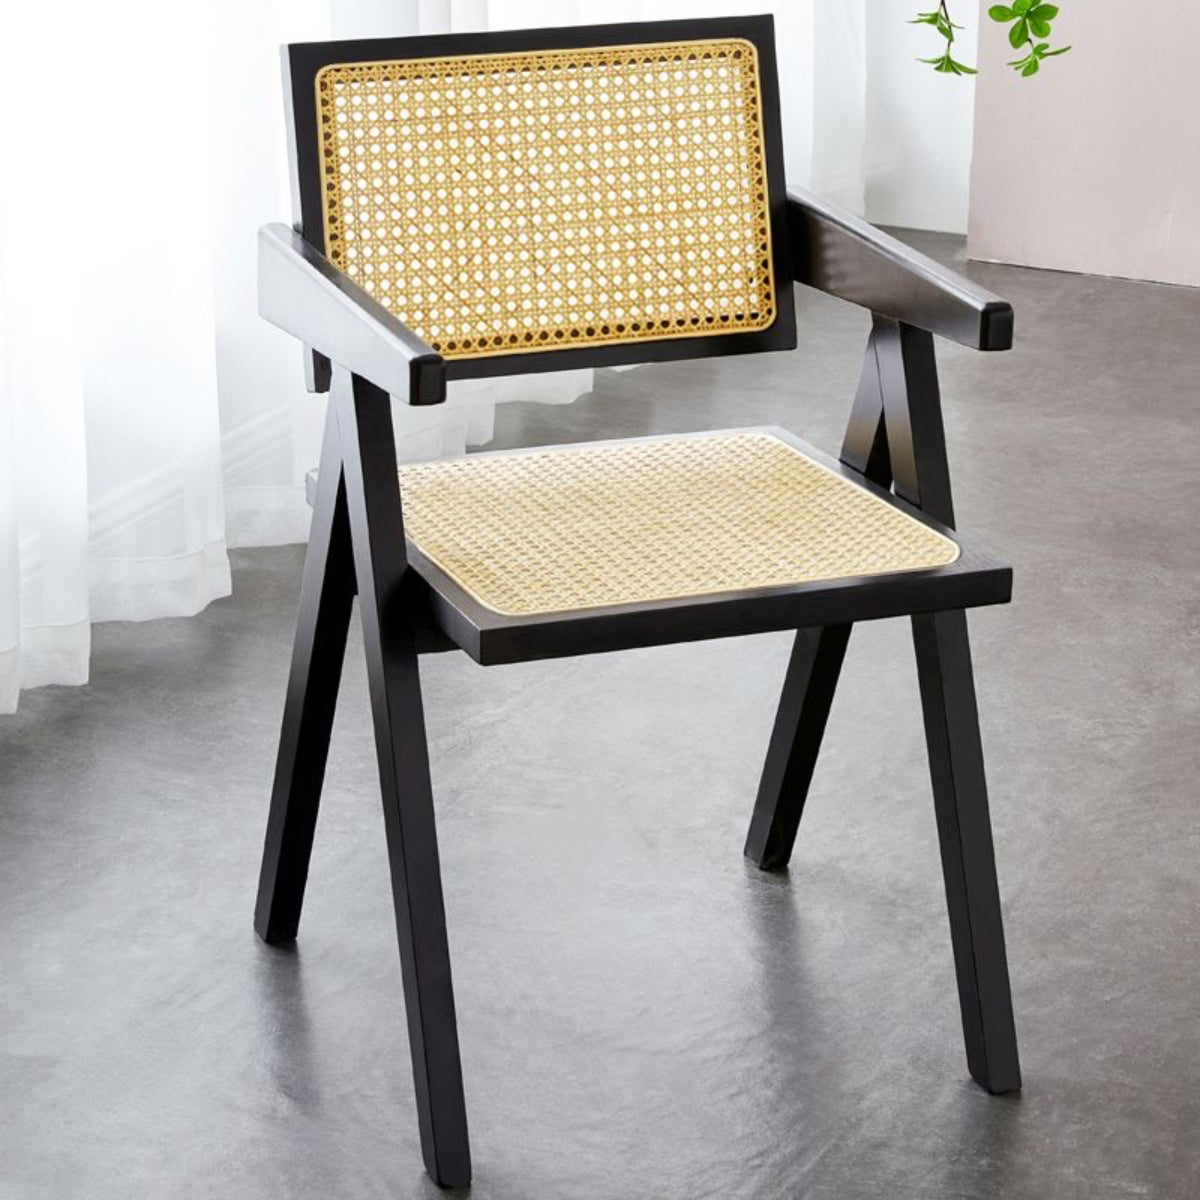 replica jeanneret armchair rattan and solid wood black front view